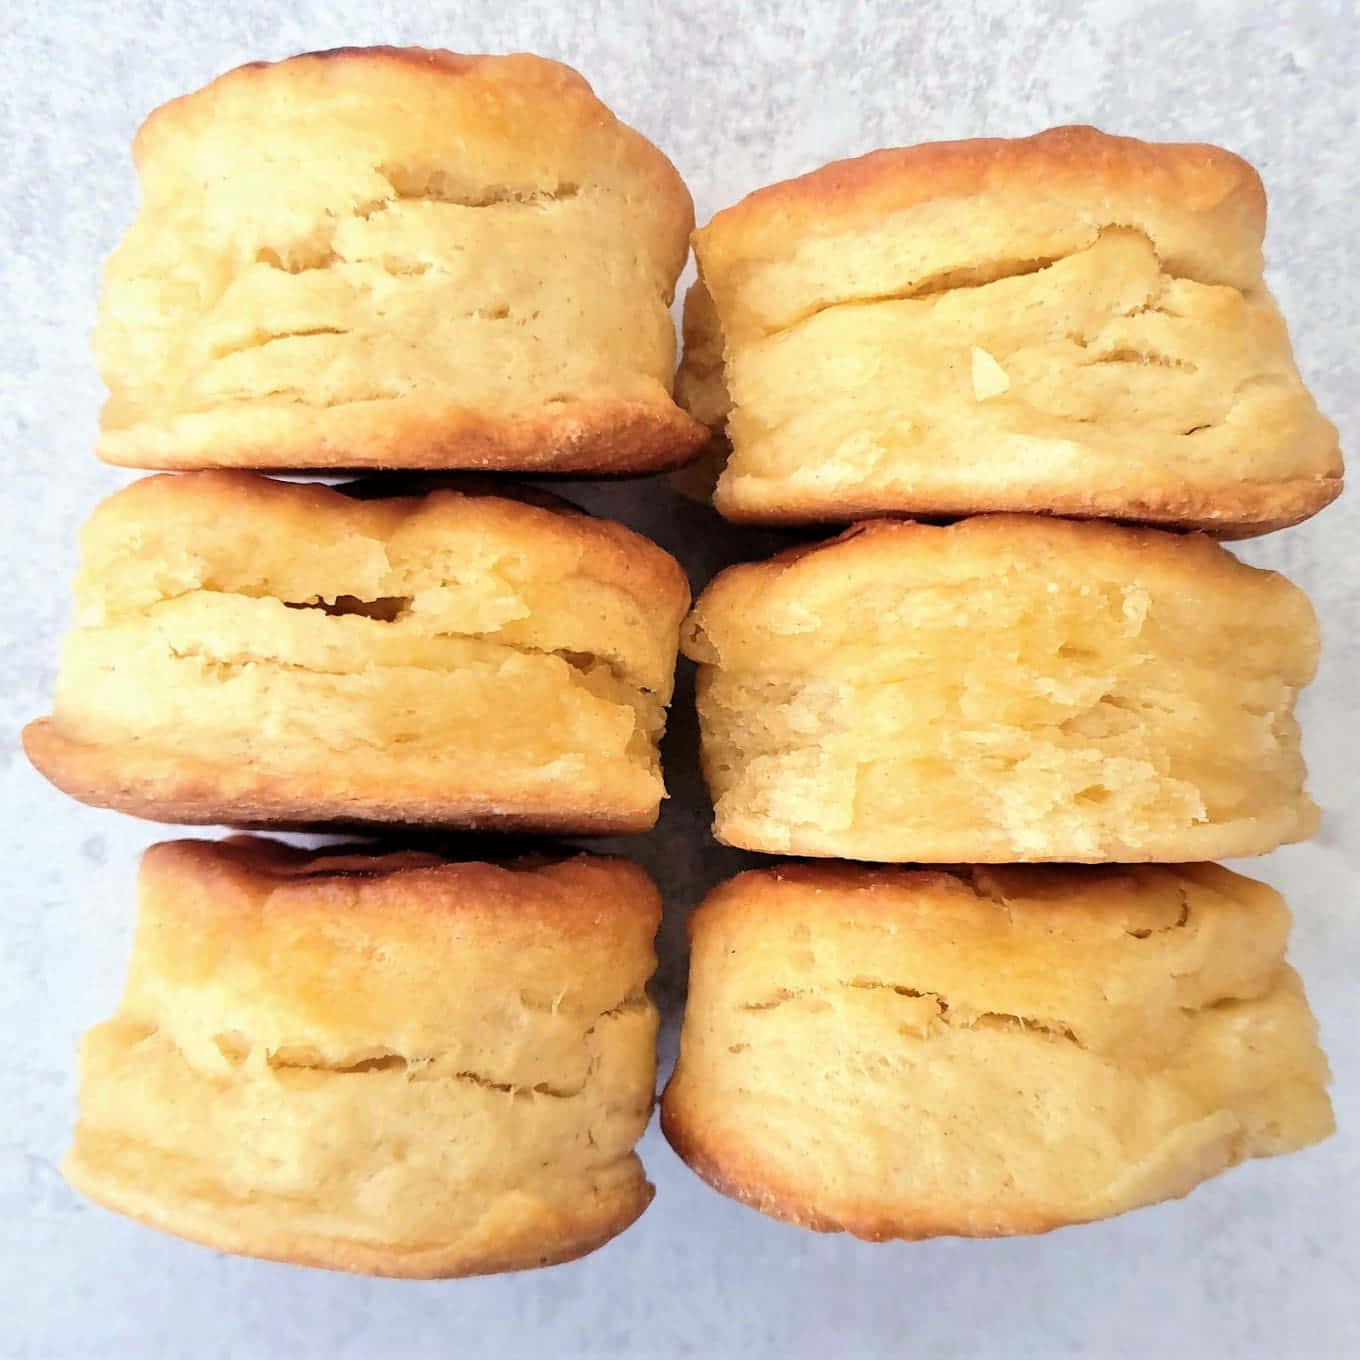 Enjoy a crunchy and delicious biscuit any time of day